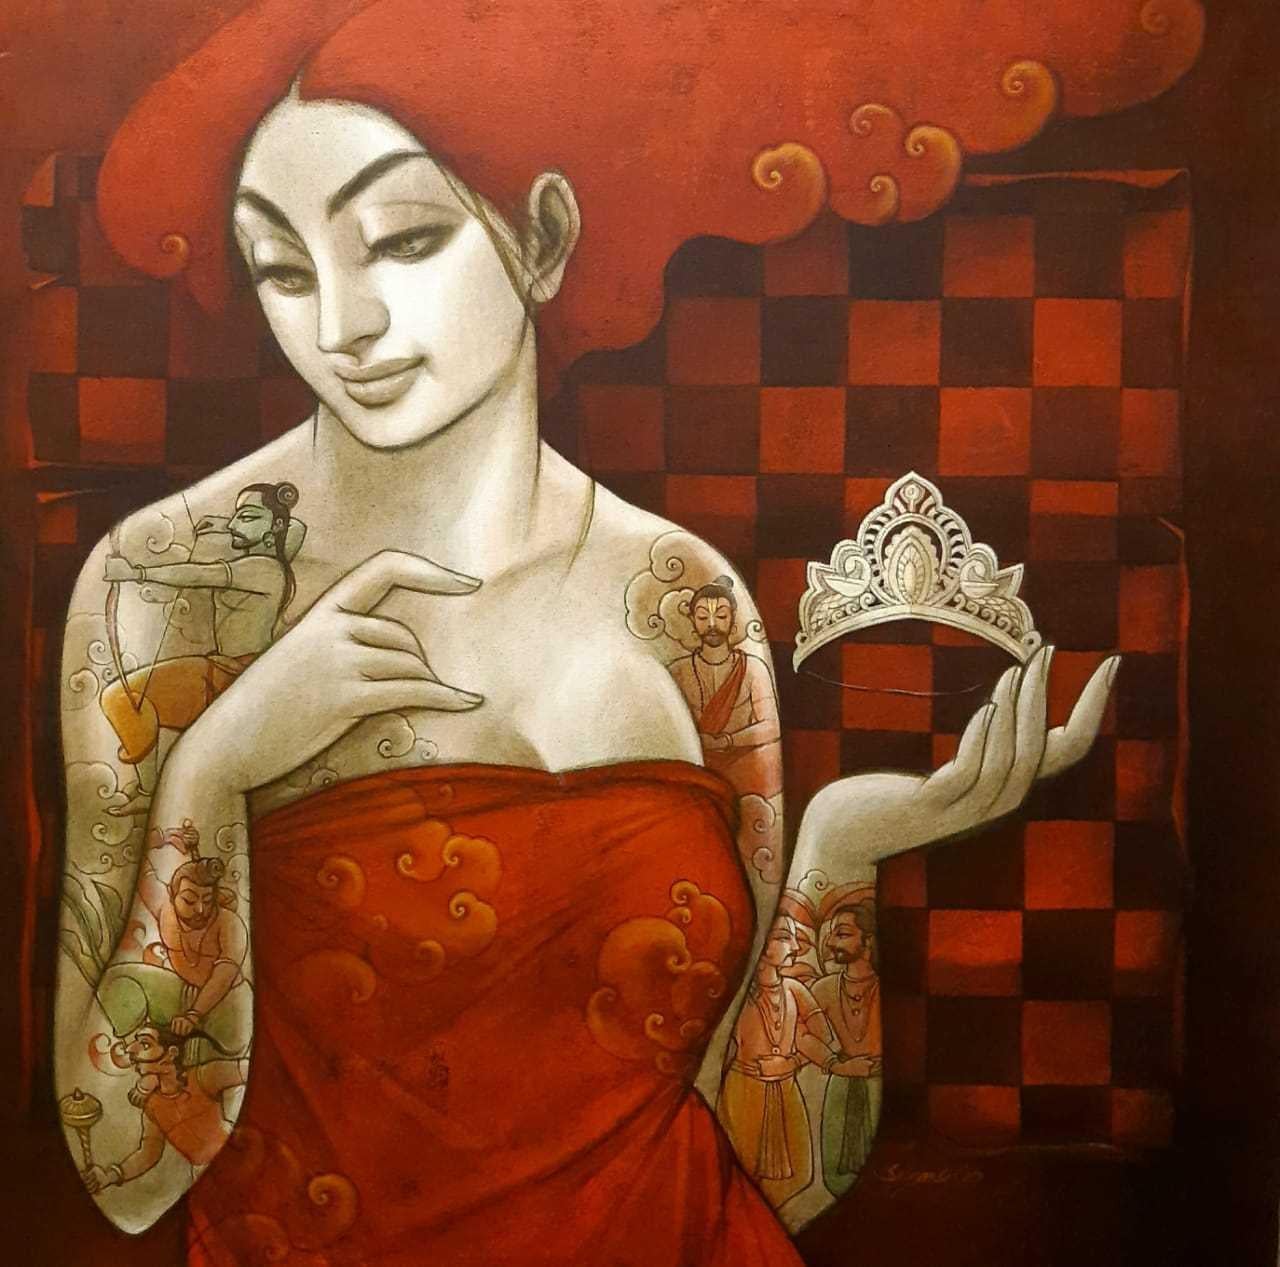 Panchali with Crown and mythology tattoo, Orange,Red Acrylic Canvas "In Stock"